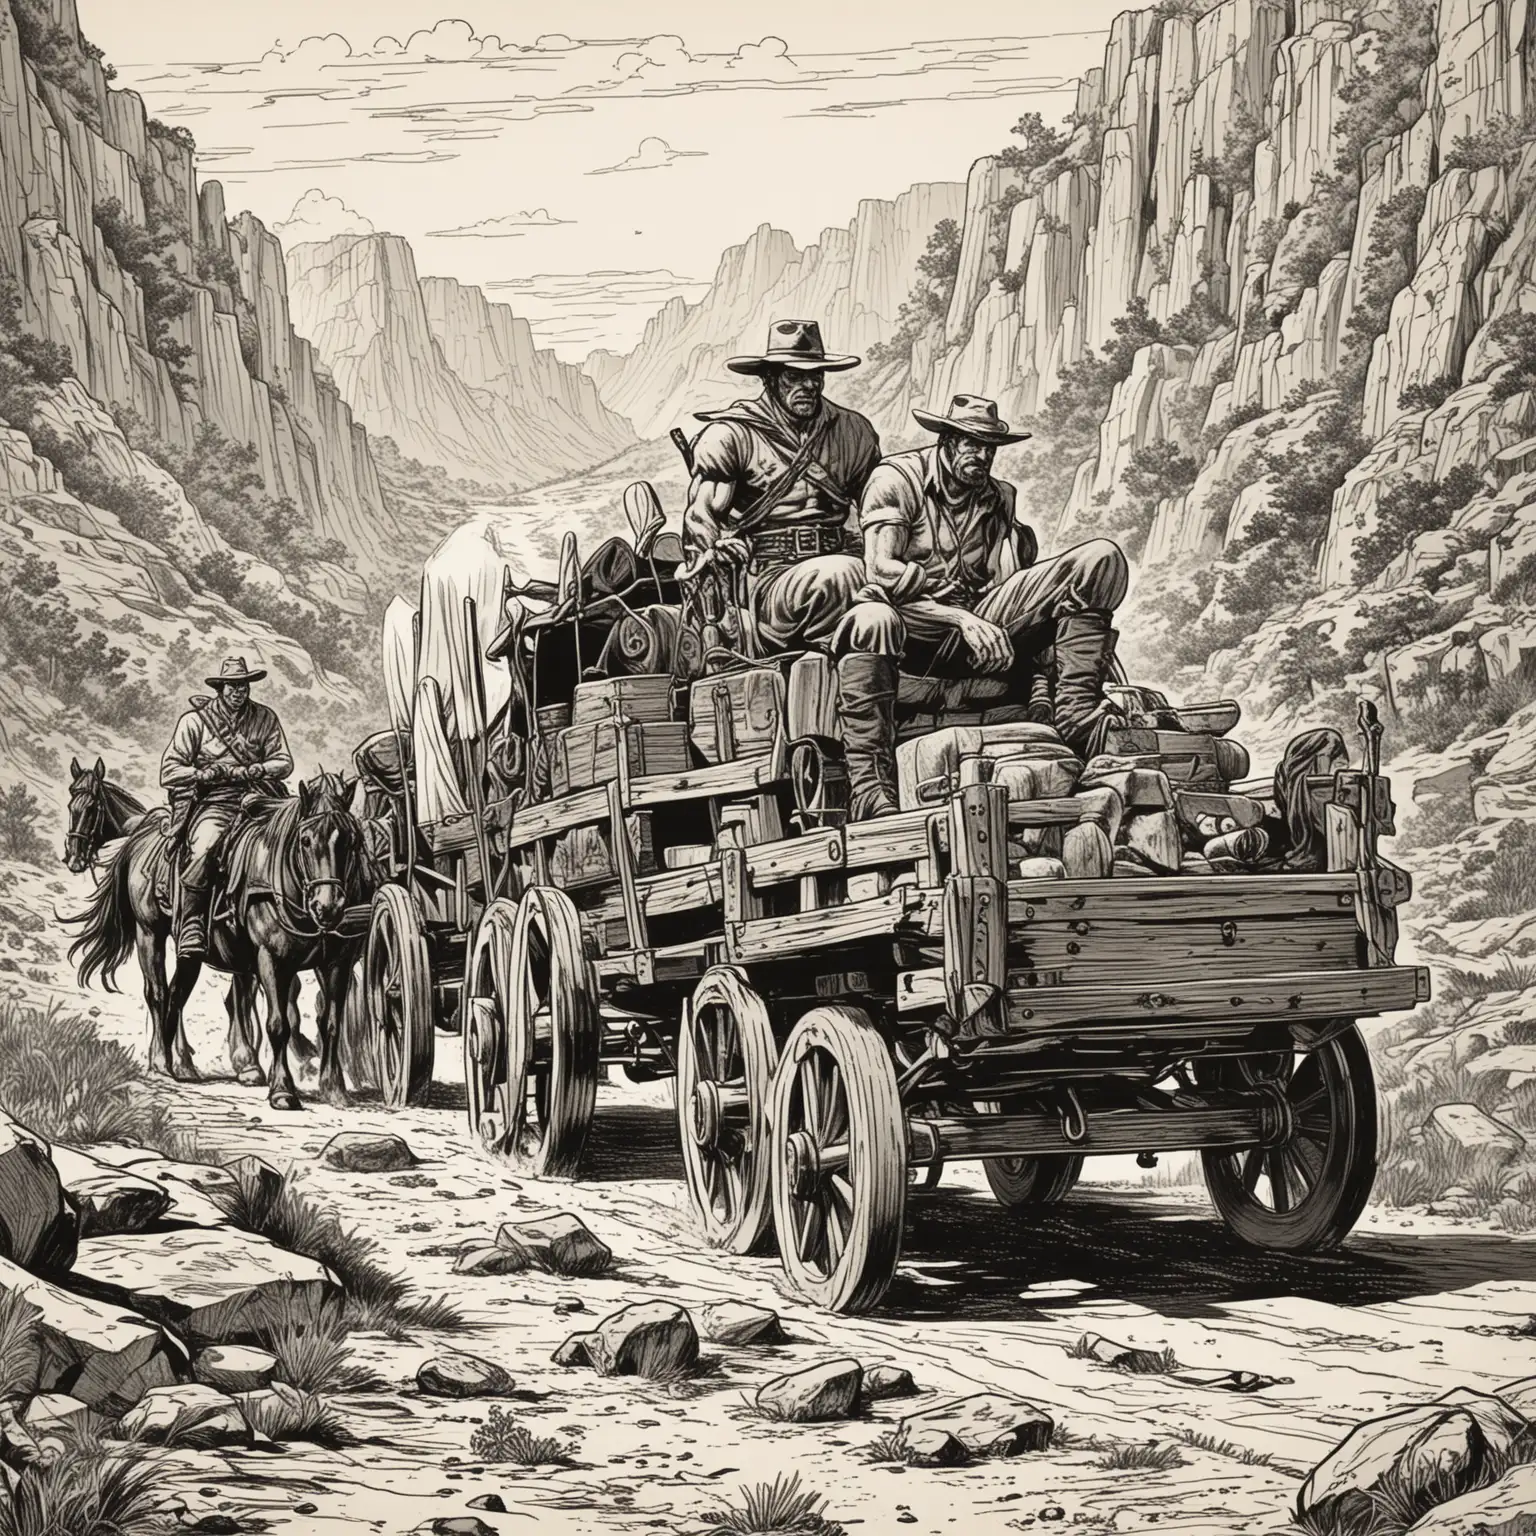 Traveling through Wagon Trails A Comicbook Inked Journey by John Buscema